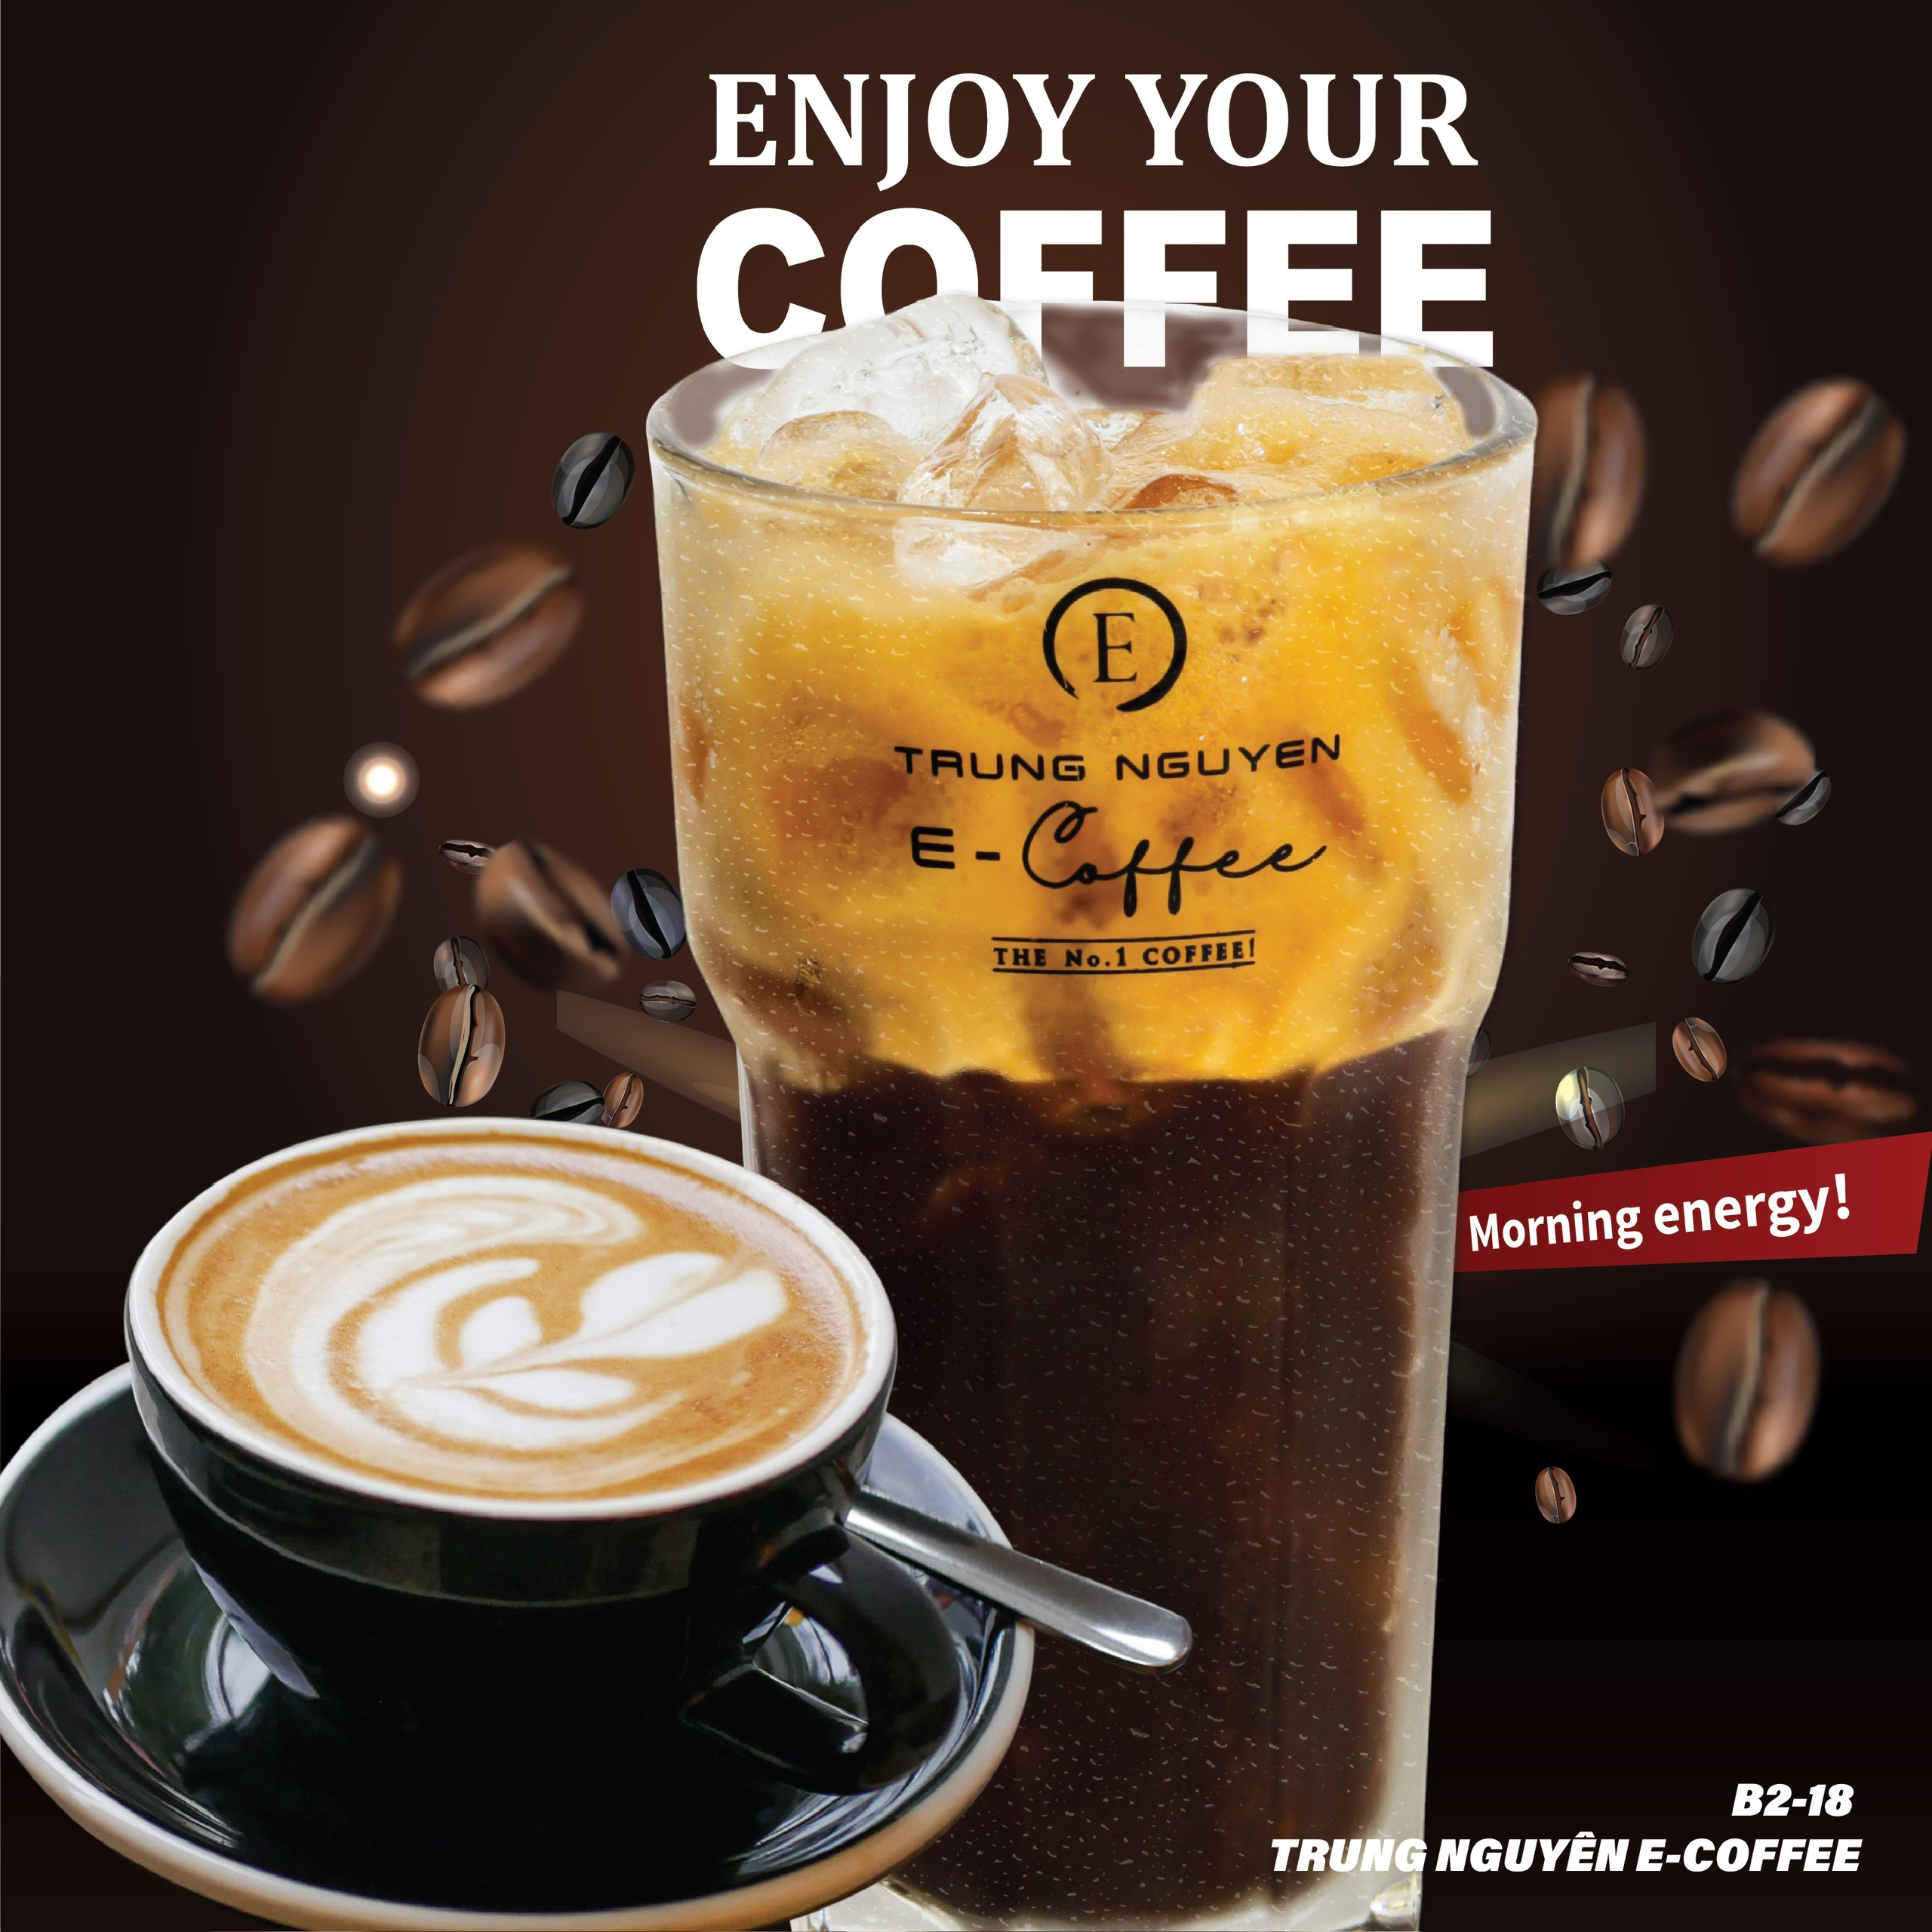 CELEBRATE SAIGON CENTRE 8TH BIRTHDAY - BUY 1 GET 1 AT TRUNG NGUYEN E-COFFEE